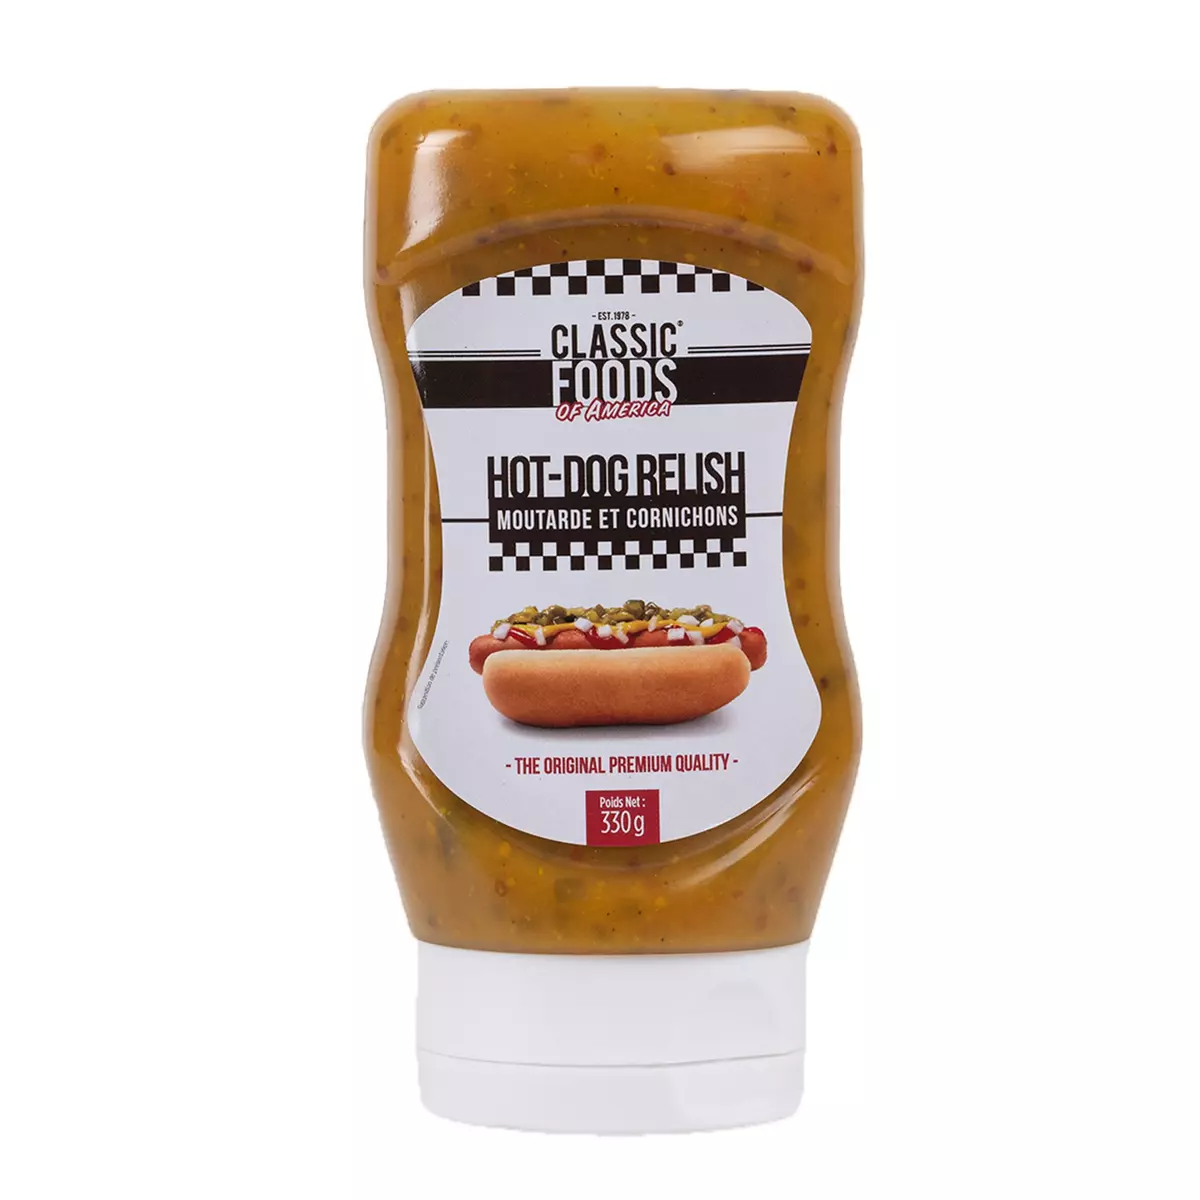 CLASSIC FOODS OF AMERICA Hot-dog relish moutarde et cornichons 300g